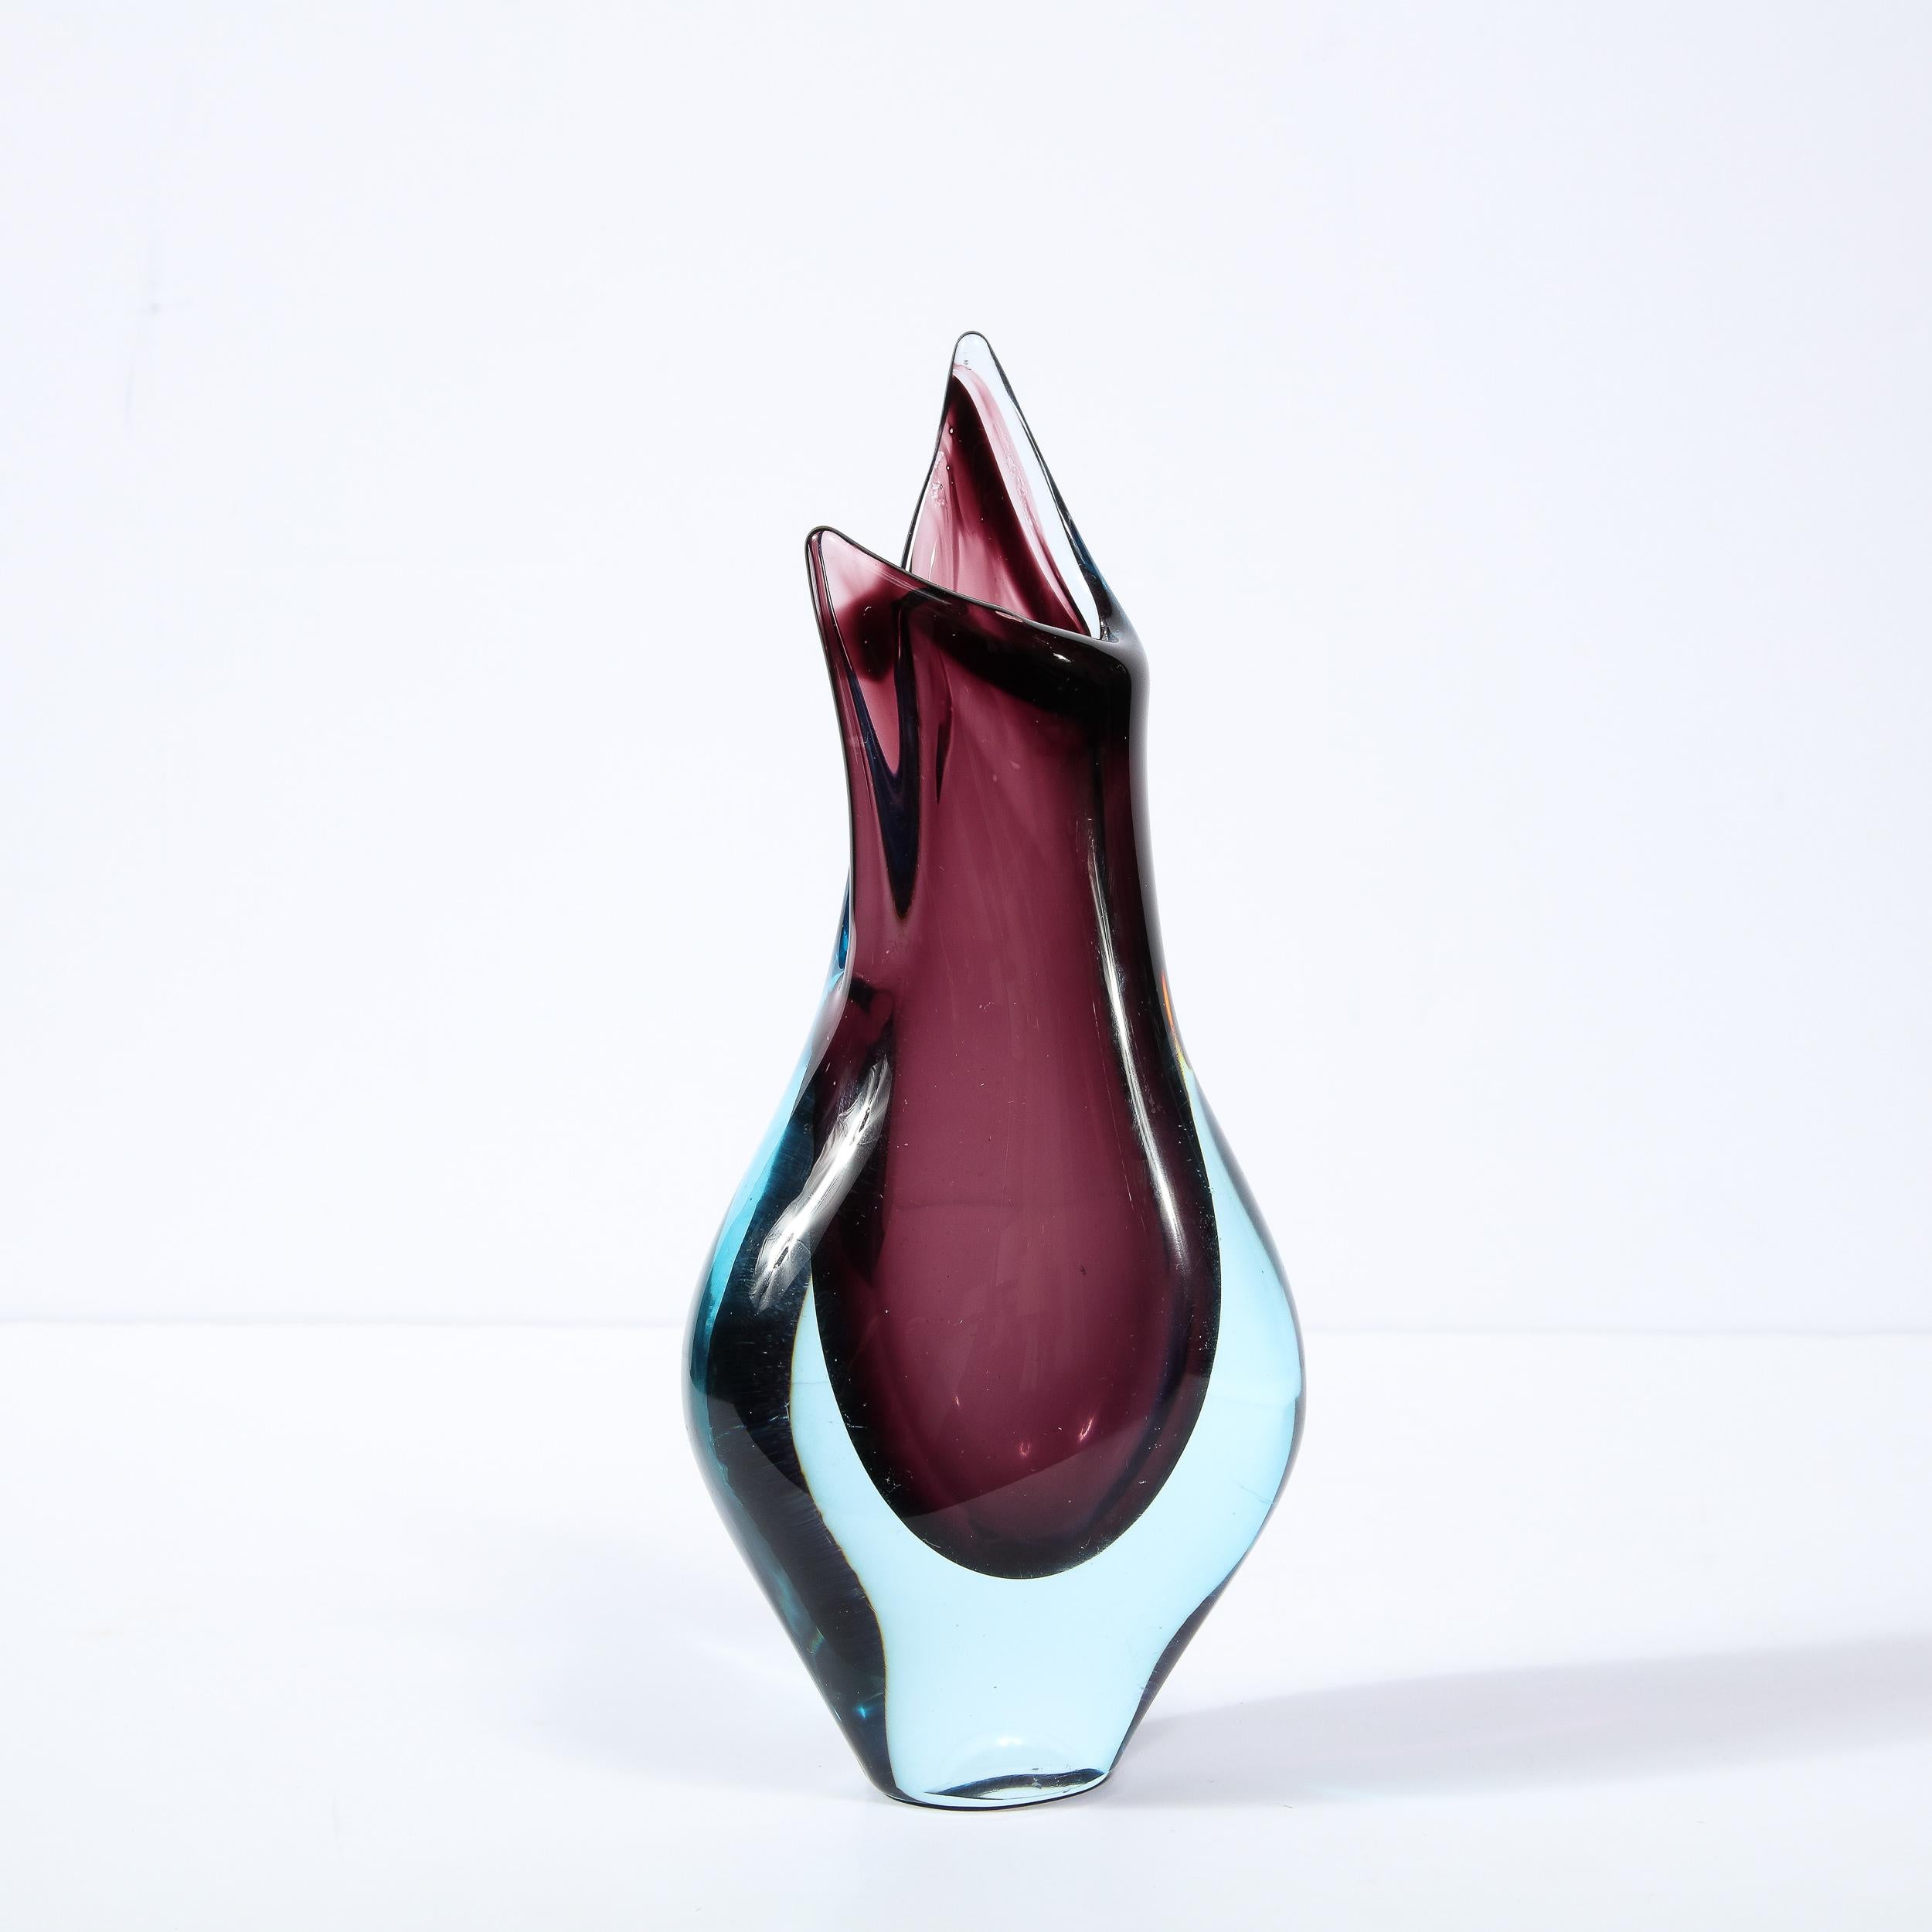 Mid-Century Modernist Sculptural Amethyst & Acqua Murano Glass Vase In Excellent Condition For Sale In New York, NY